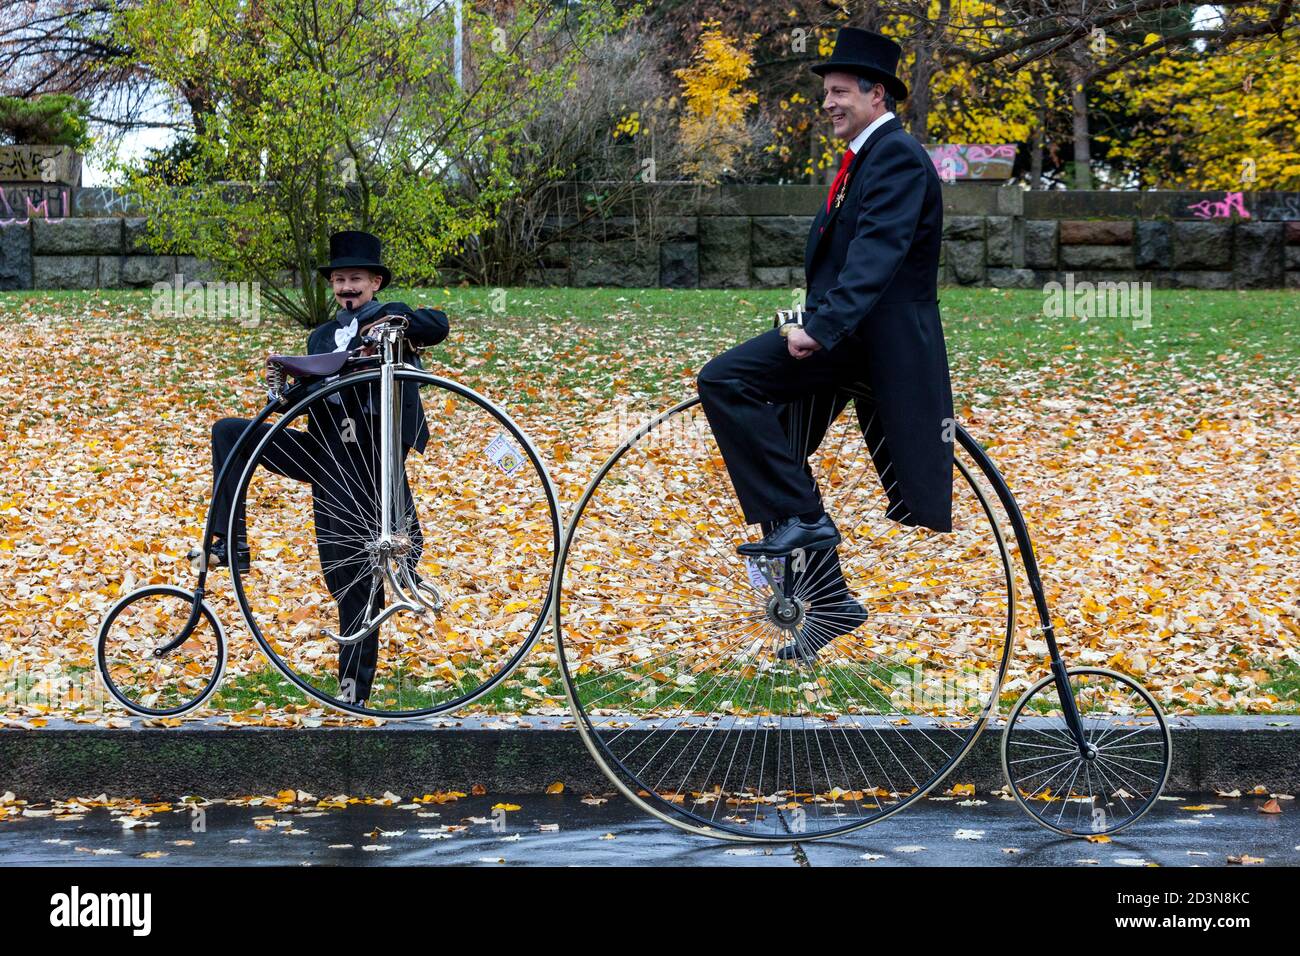 Two cyclists on Penny Farthing bicycles costumes, wearing tail coat Stock Photo